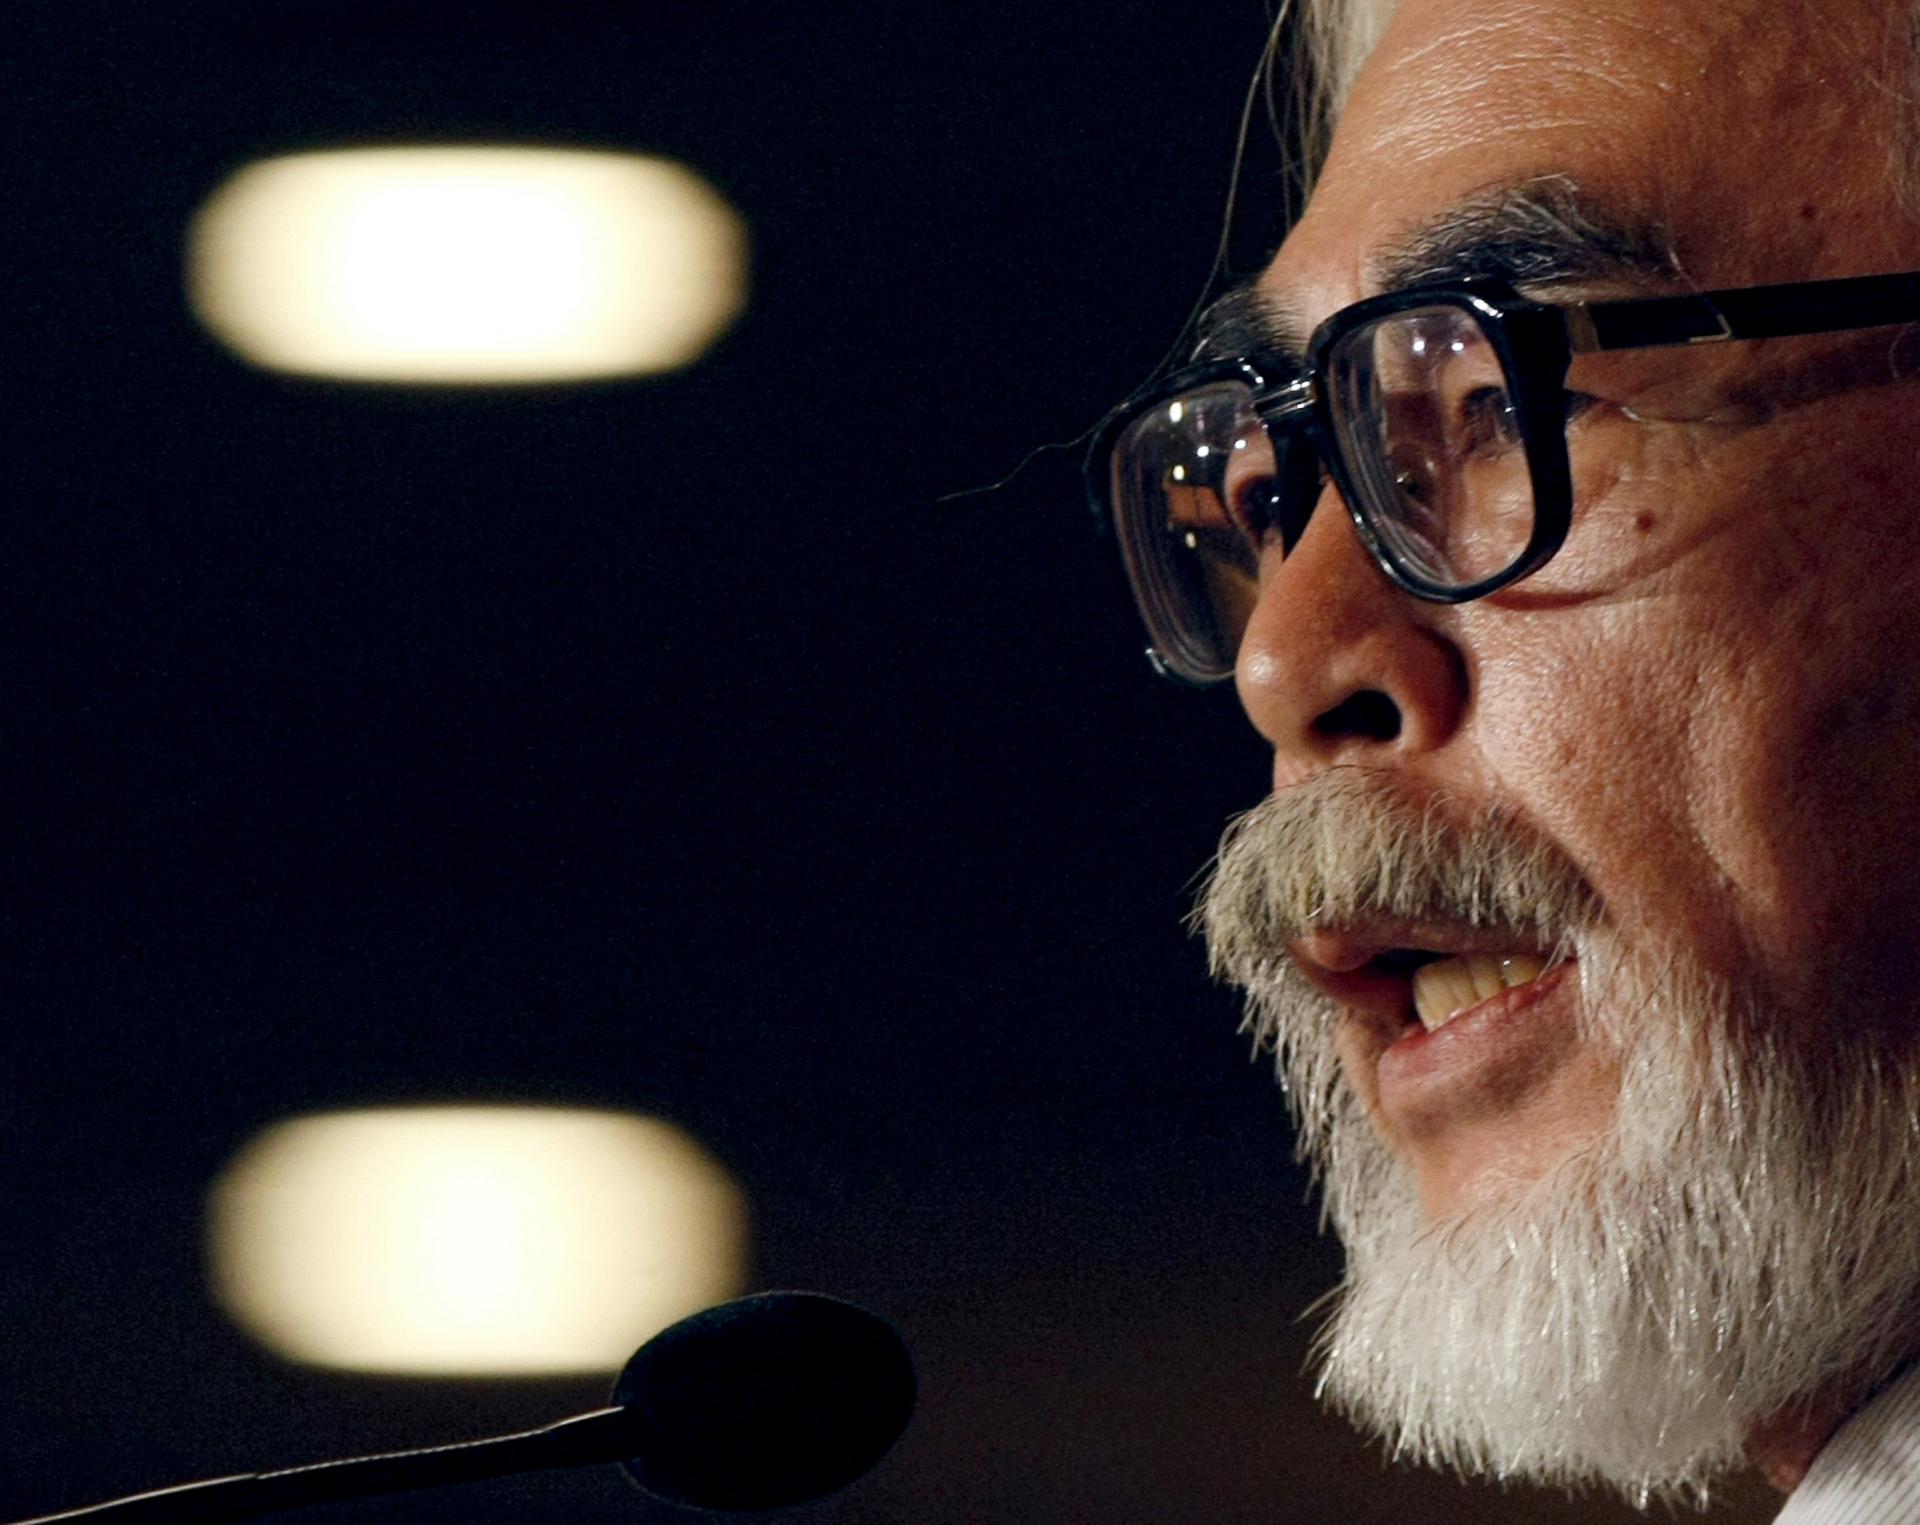 Hayao Miyazaki, whose new film addresses the dangers of nationalism and war, has been sharply criticised by some in Japan. Photo: Reuters